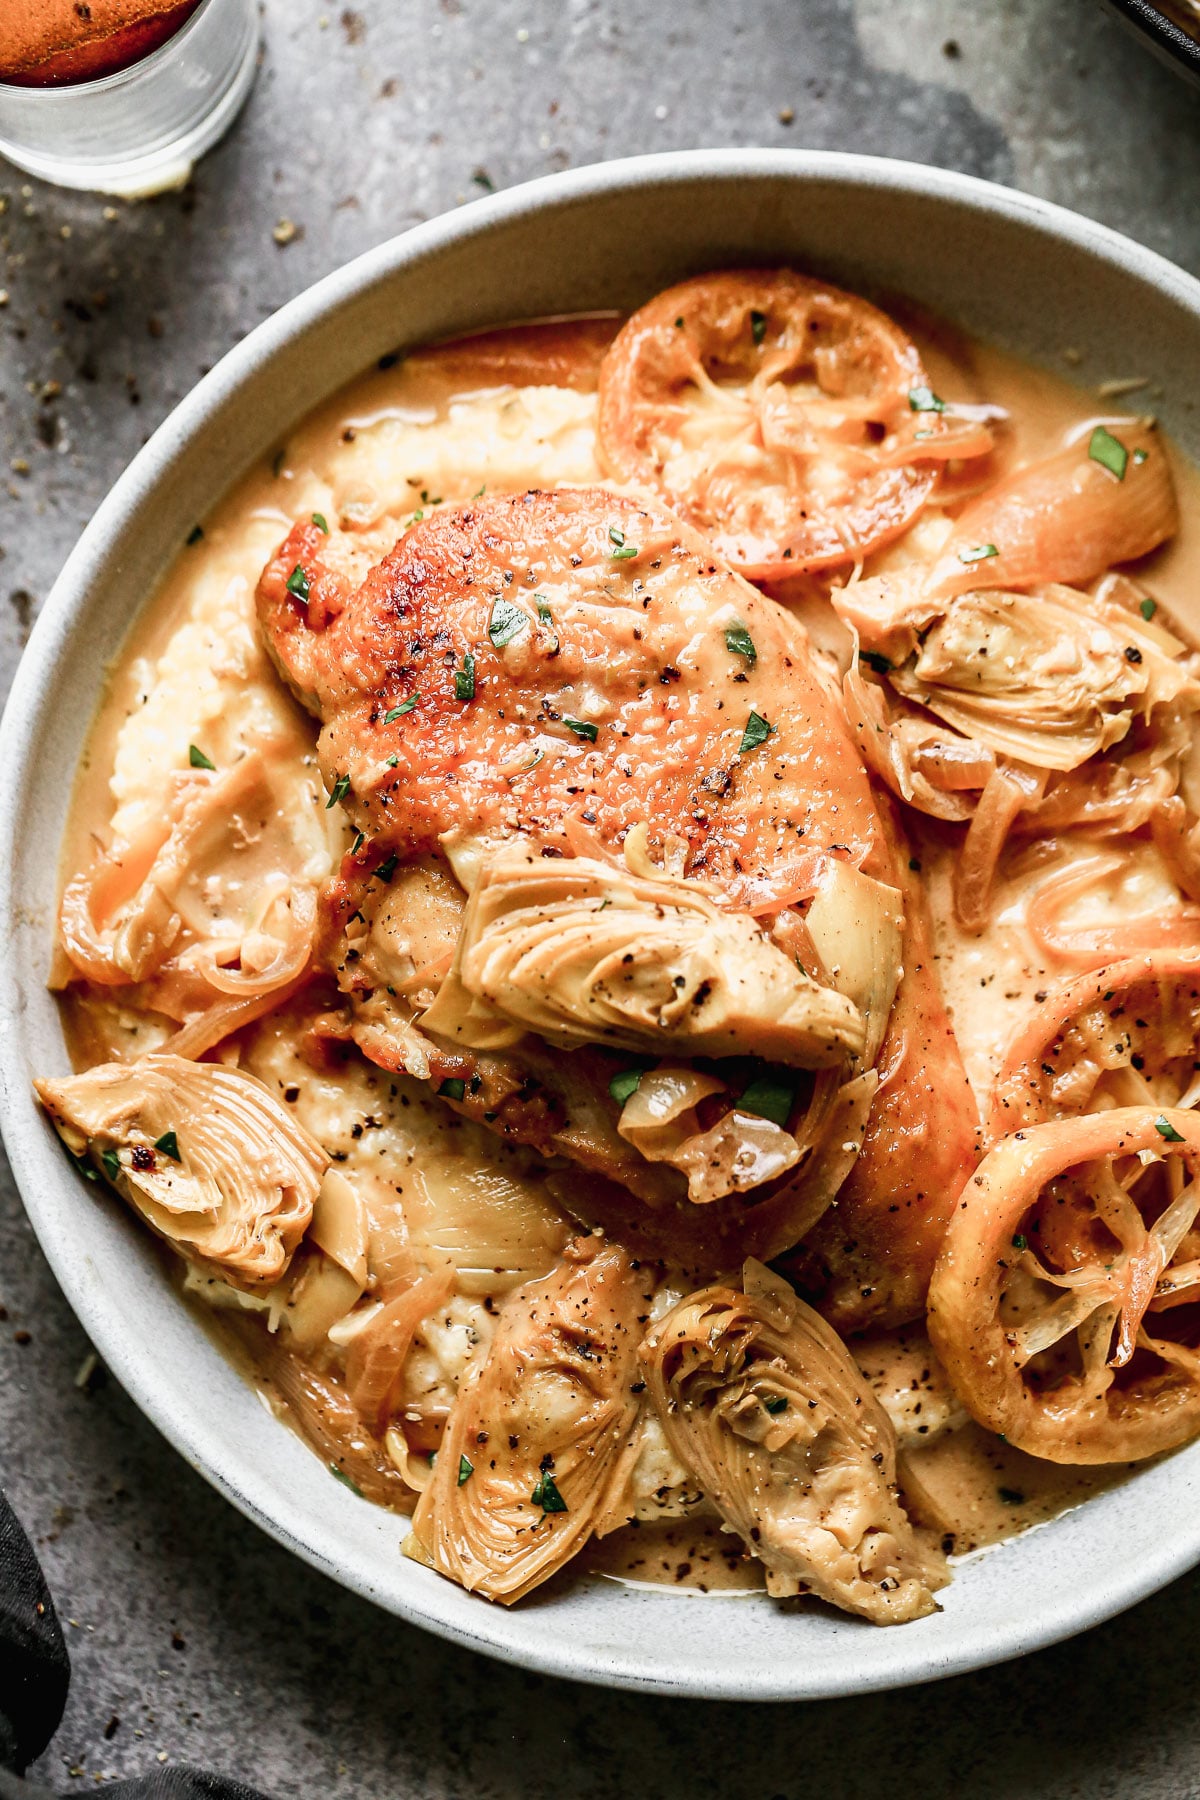 Swimming in a luscious lemon-infused wine sauce and studded with briny artichokes and sweet caramelized onions, our Chicken with Artichokes is the perfect bright springy dish to whip up when we also need a little cozy for those curve ball cold days we all get this time of year.&nbsp;